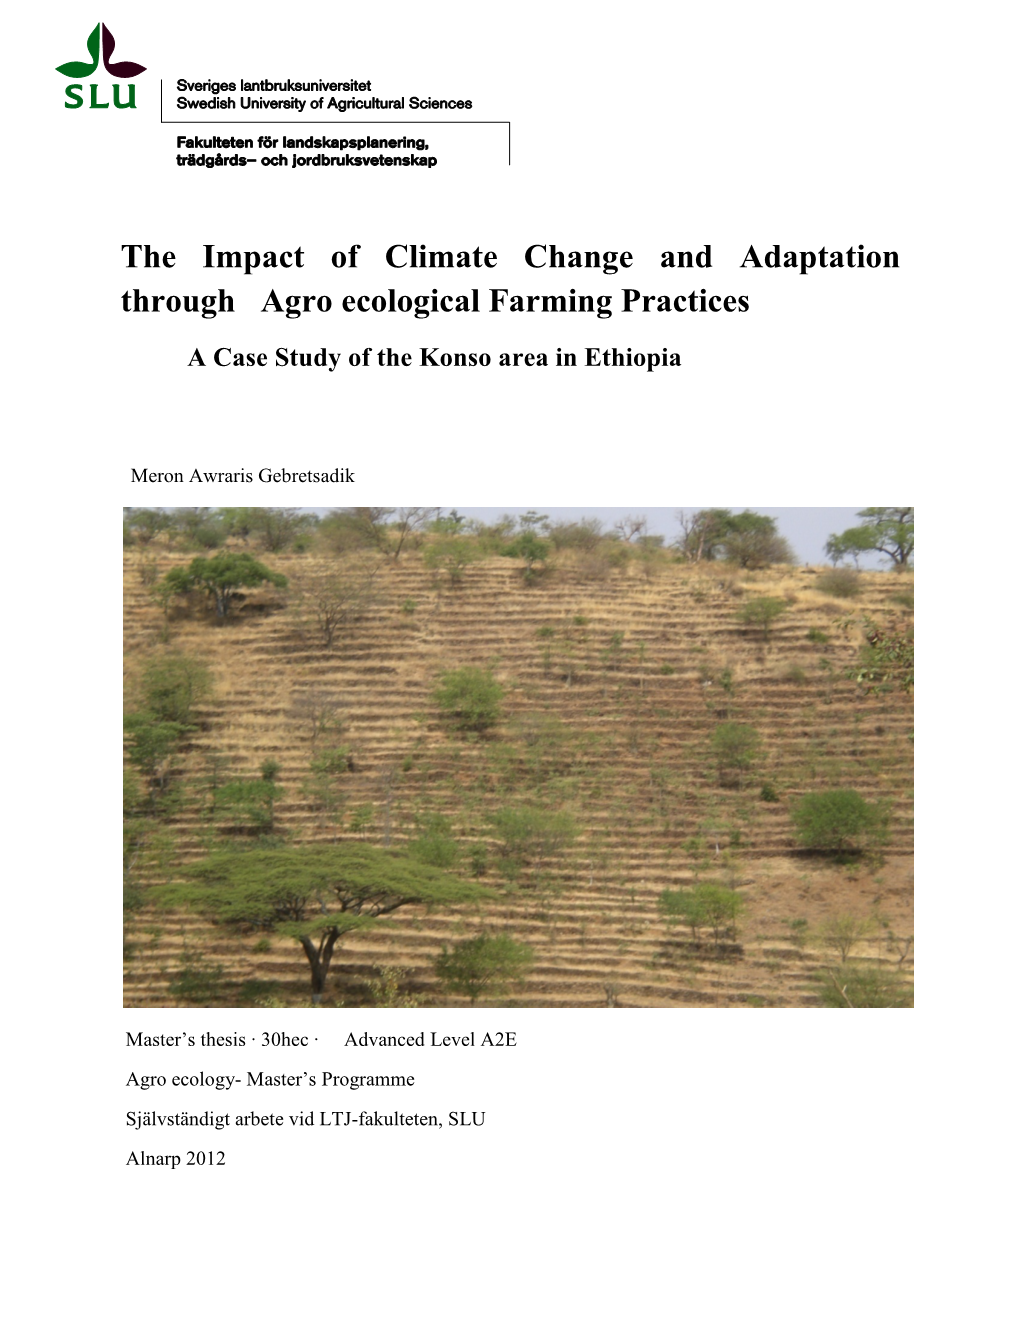 The Impact of Climate Change and Adaptation Through Agro Ecological Farming Practices a Case Study of the Konso Area in Ethiopia